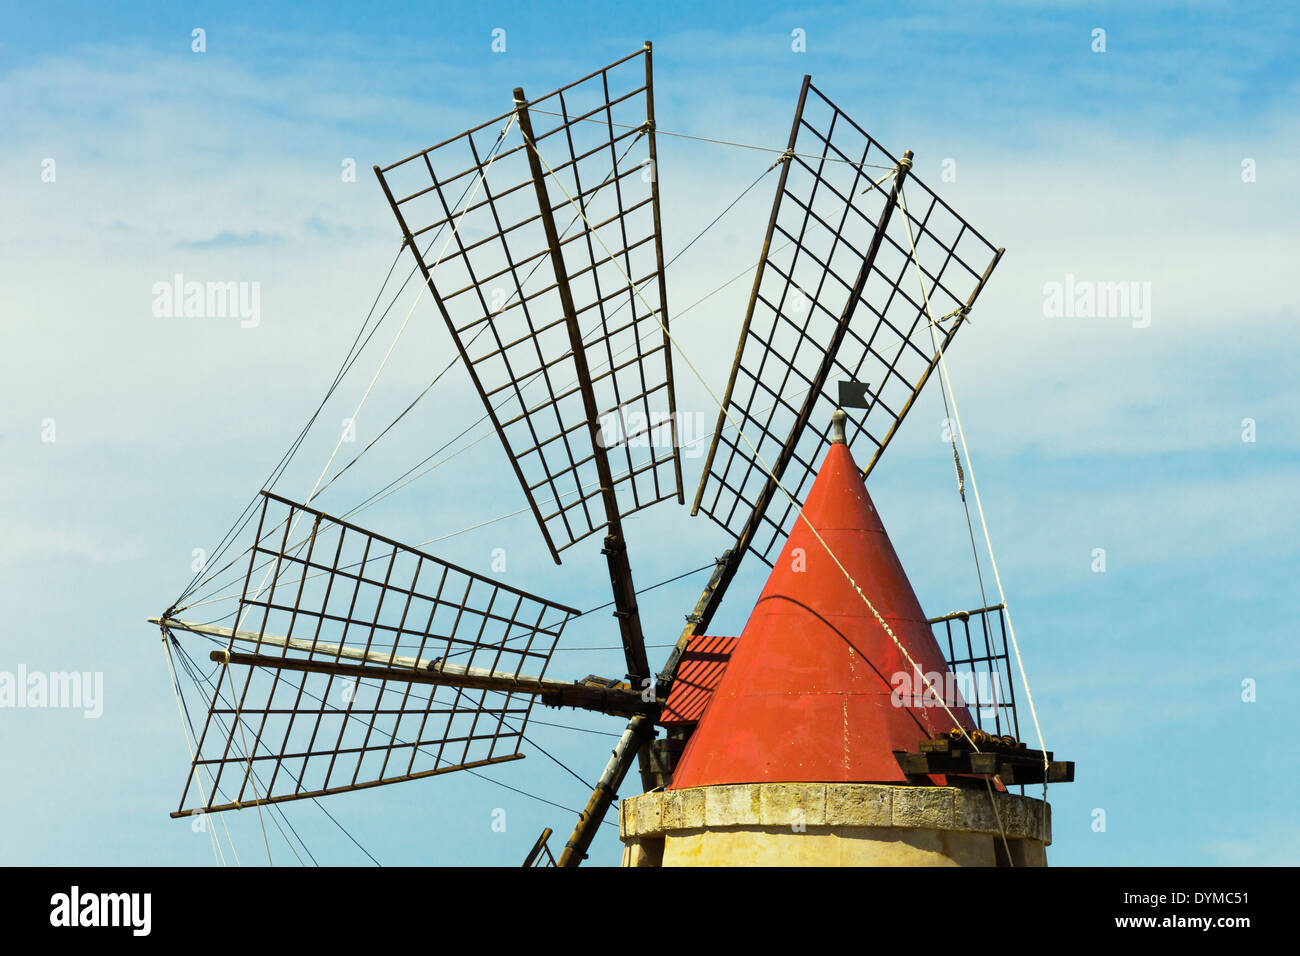 16thC windmill at the Ettore & Infersa Saltworks by the Stagnone Lagoon salt pan area south of Trapani; Marsala, Sicily, Italy Stock Photo